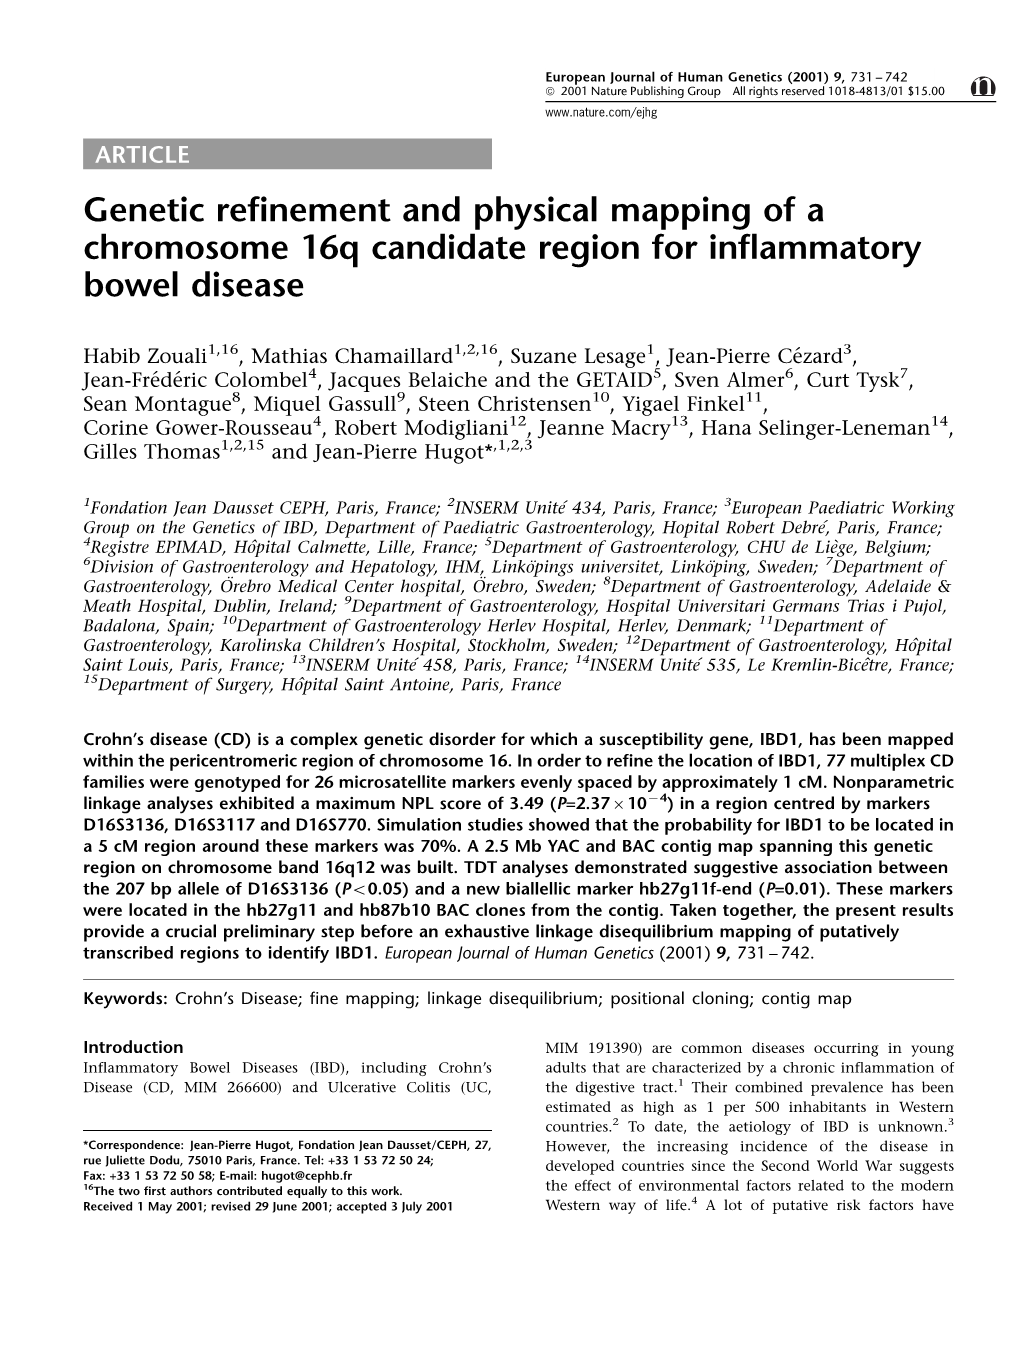 Genetic Refinement and Physical Mapping of a Chromosome 16Q Candidate Region for Inflammatory Bowel Disease